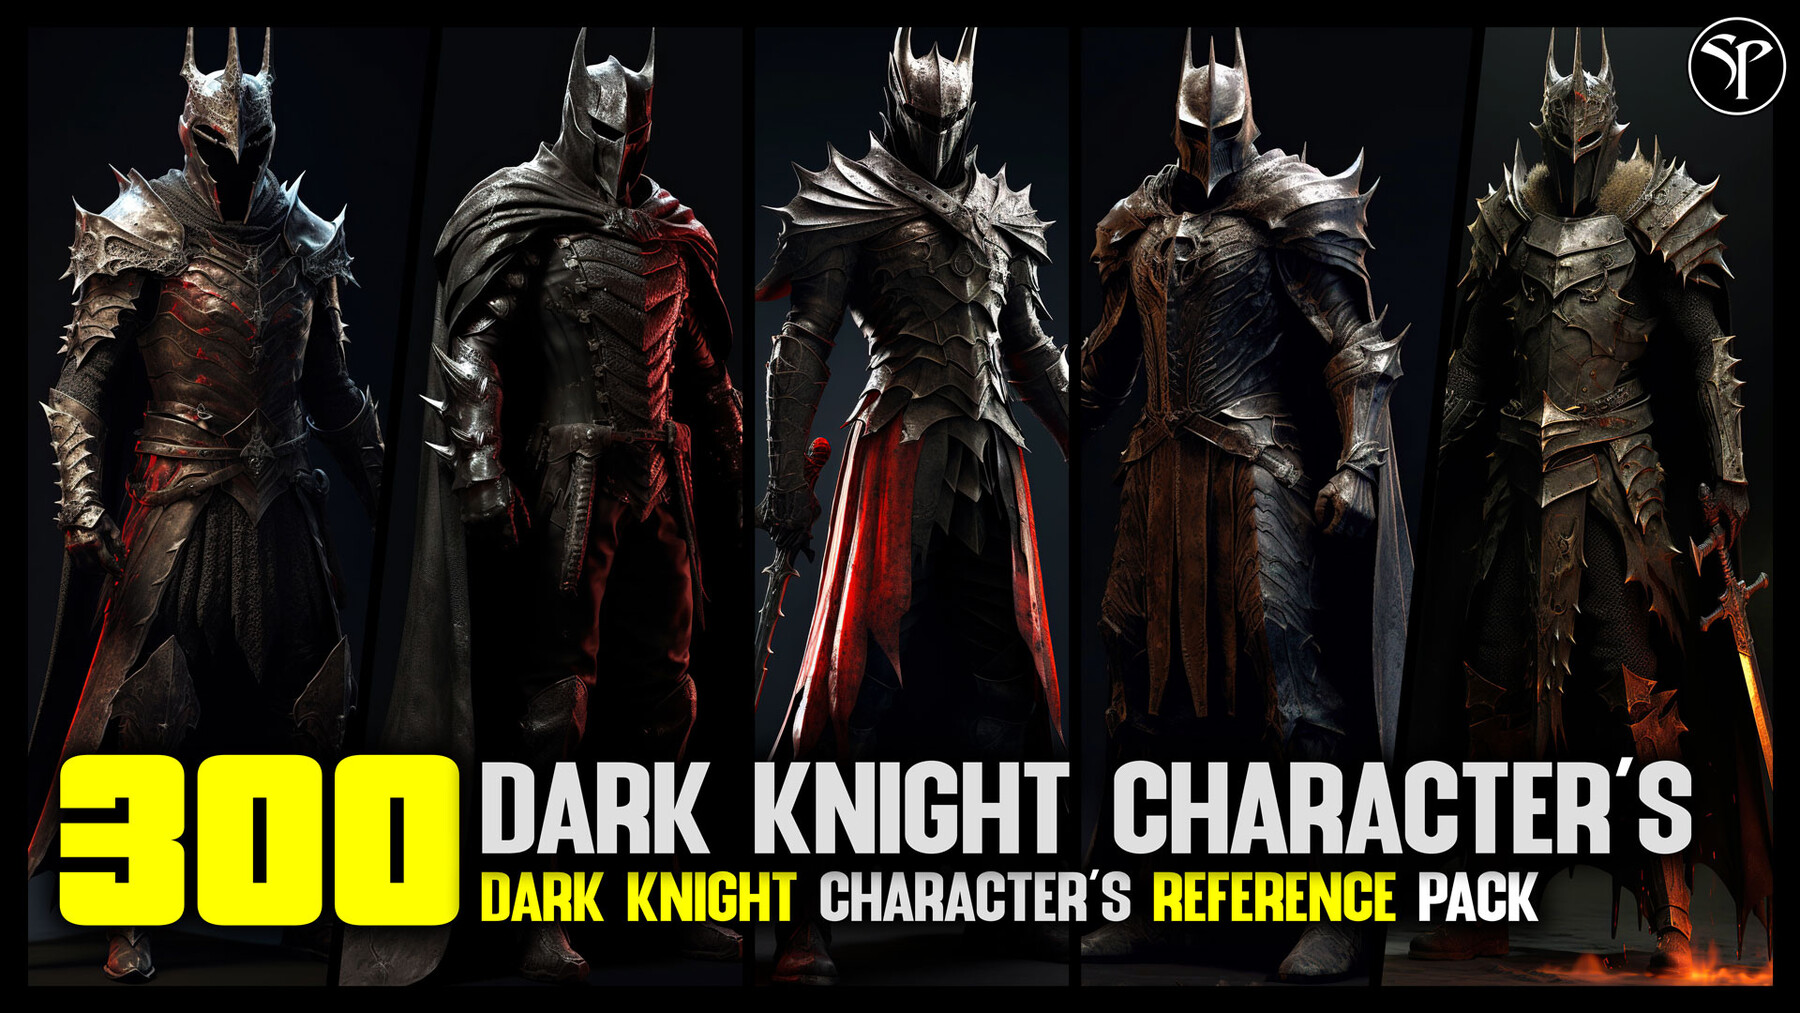 ArtStation - 300 Dark Knight Characters - 4K Reference Image Pack - Vol ...